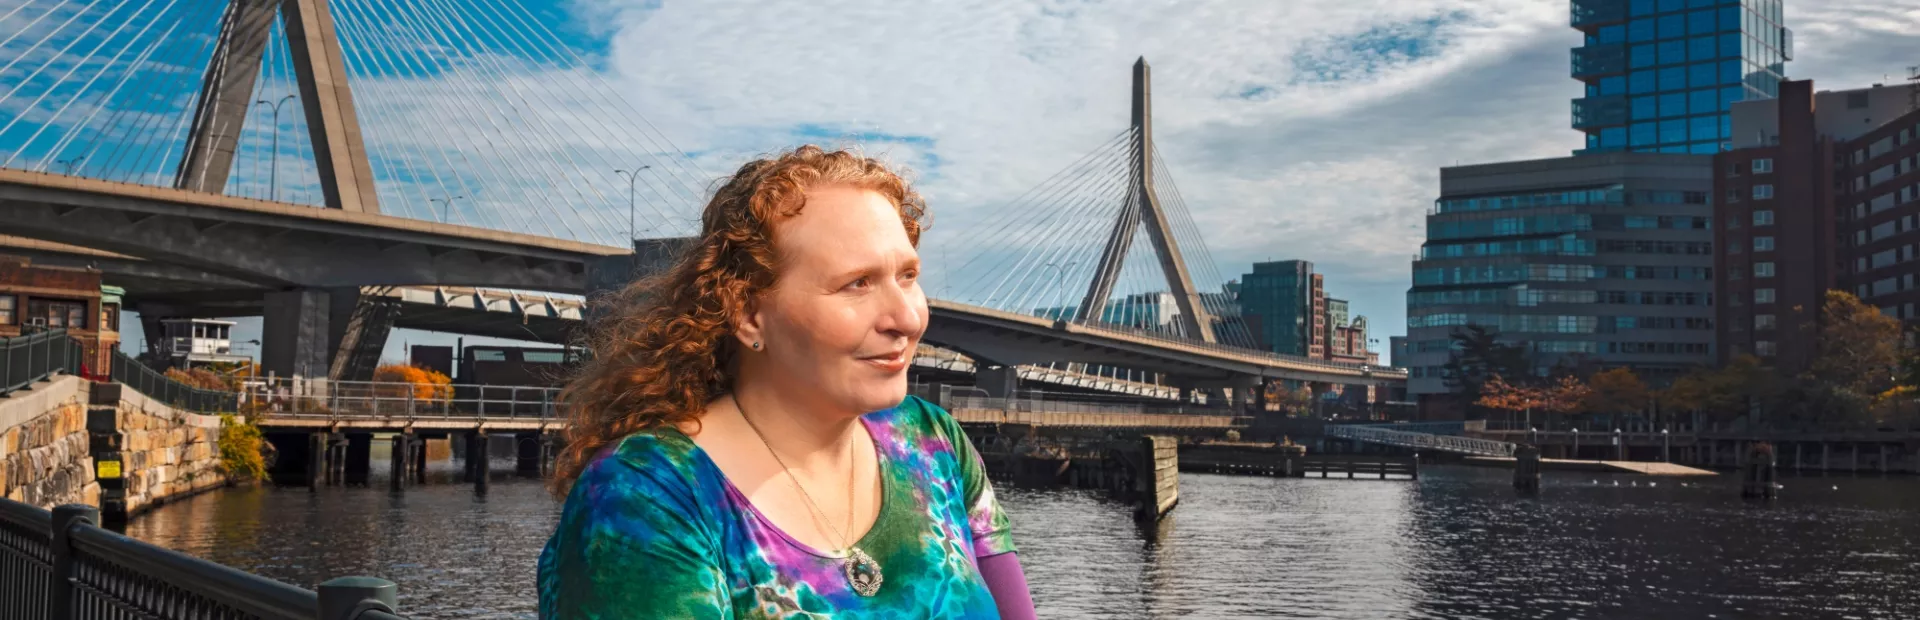 Laurie Brunner, a breast cancer survivor who participated in a Novartis clinical trial, in her home city of Boston, MA, US.